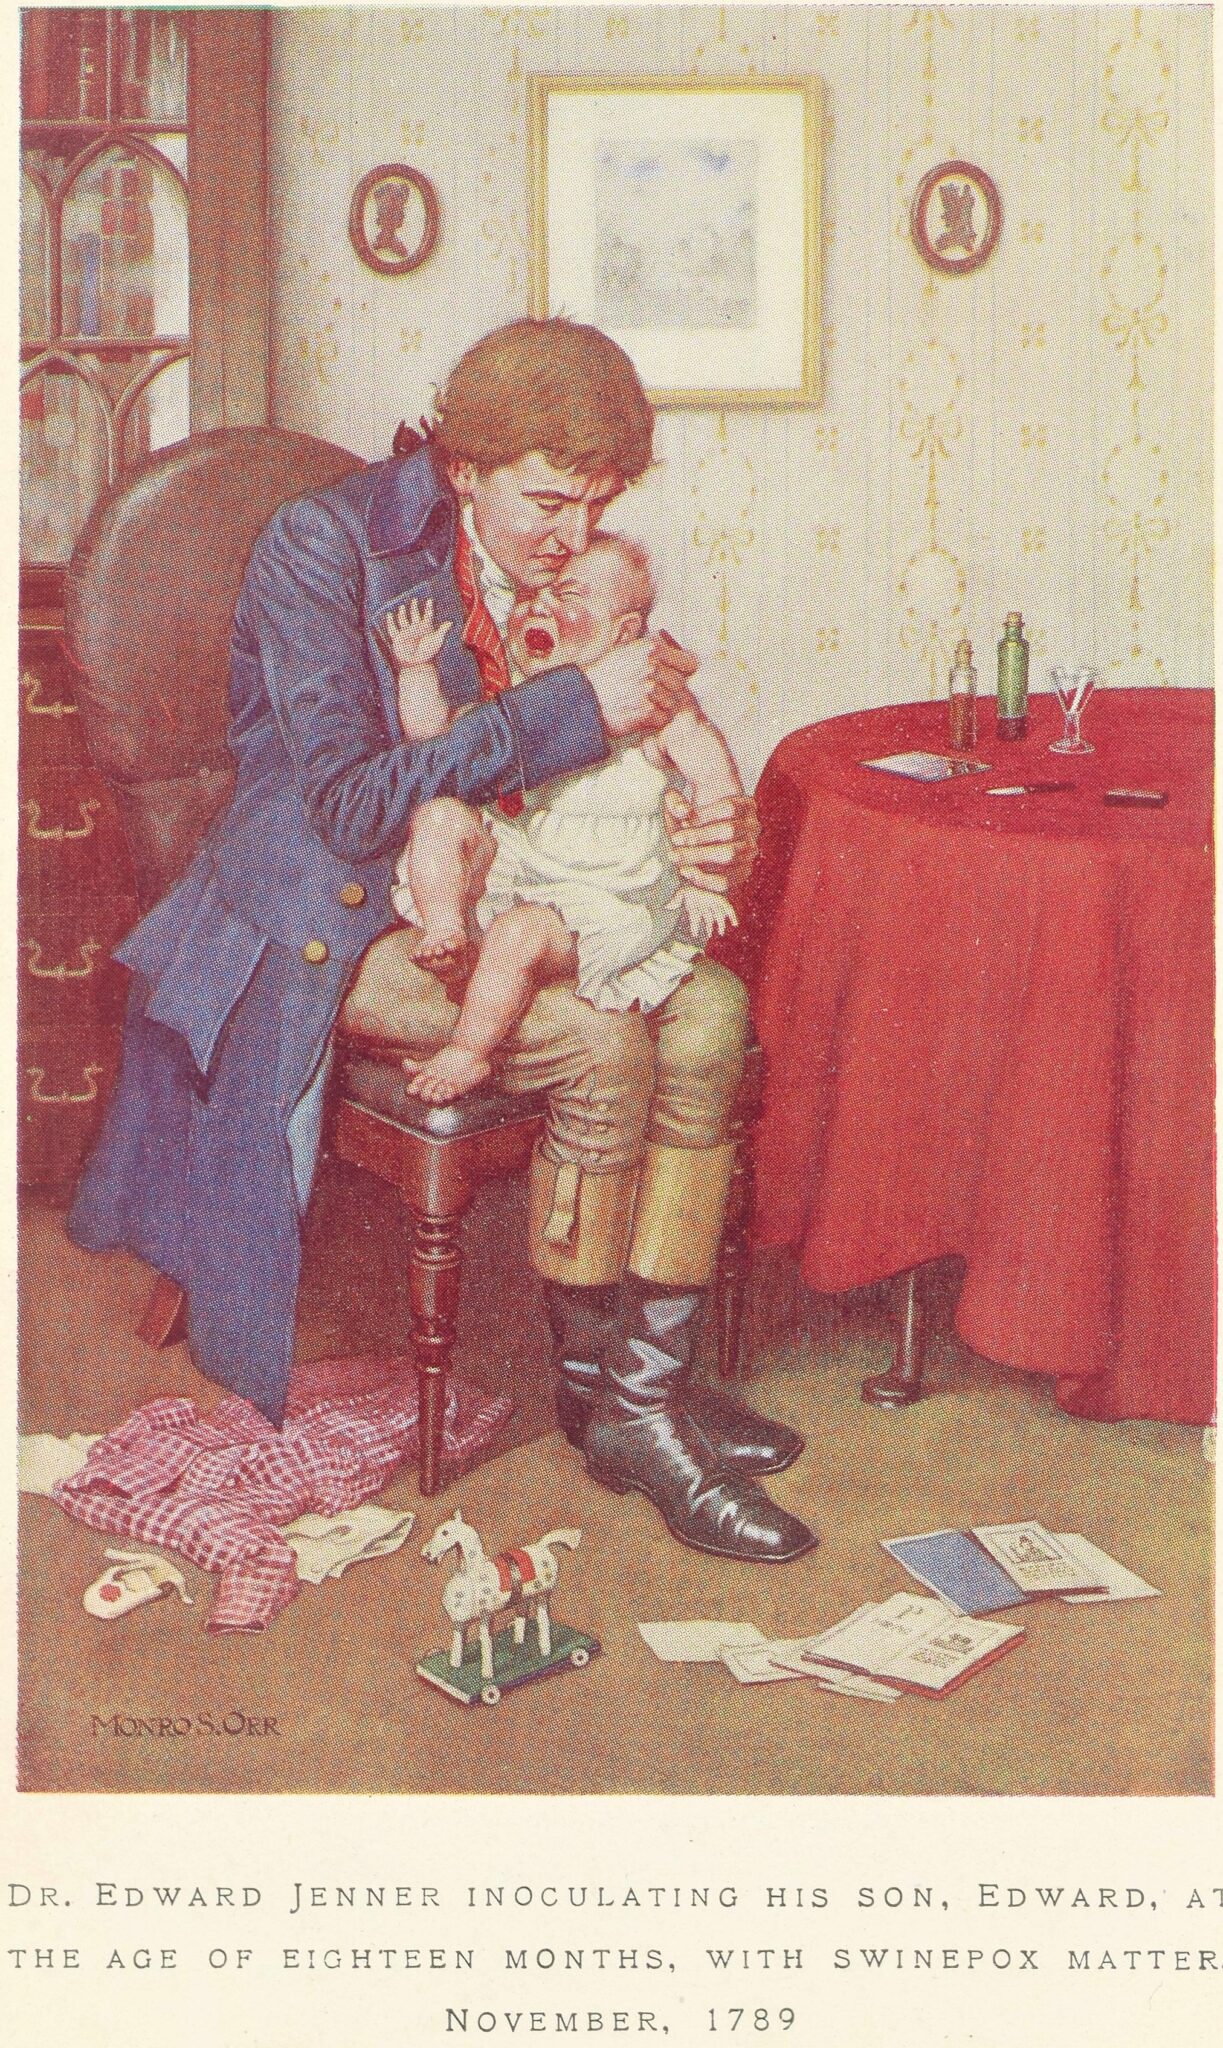 Edward Jenner vaccinating his 18 month old son Edward with swinepox matter in 1789